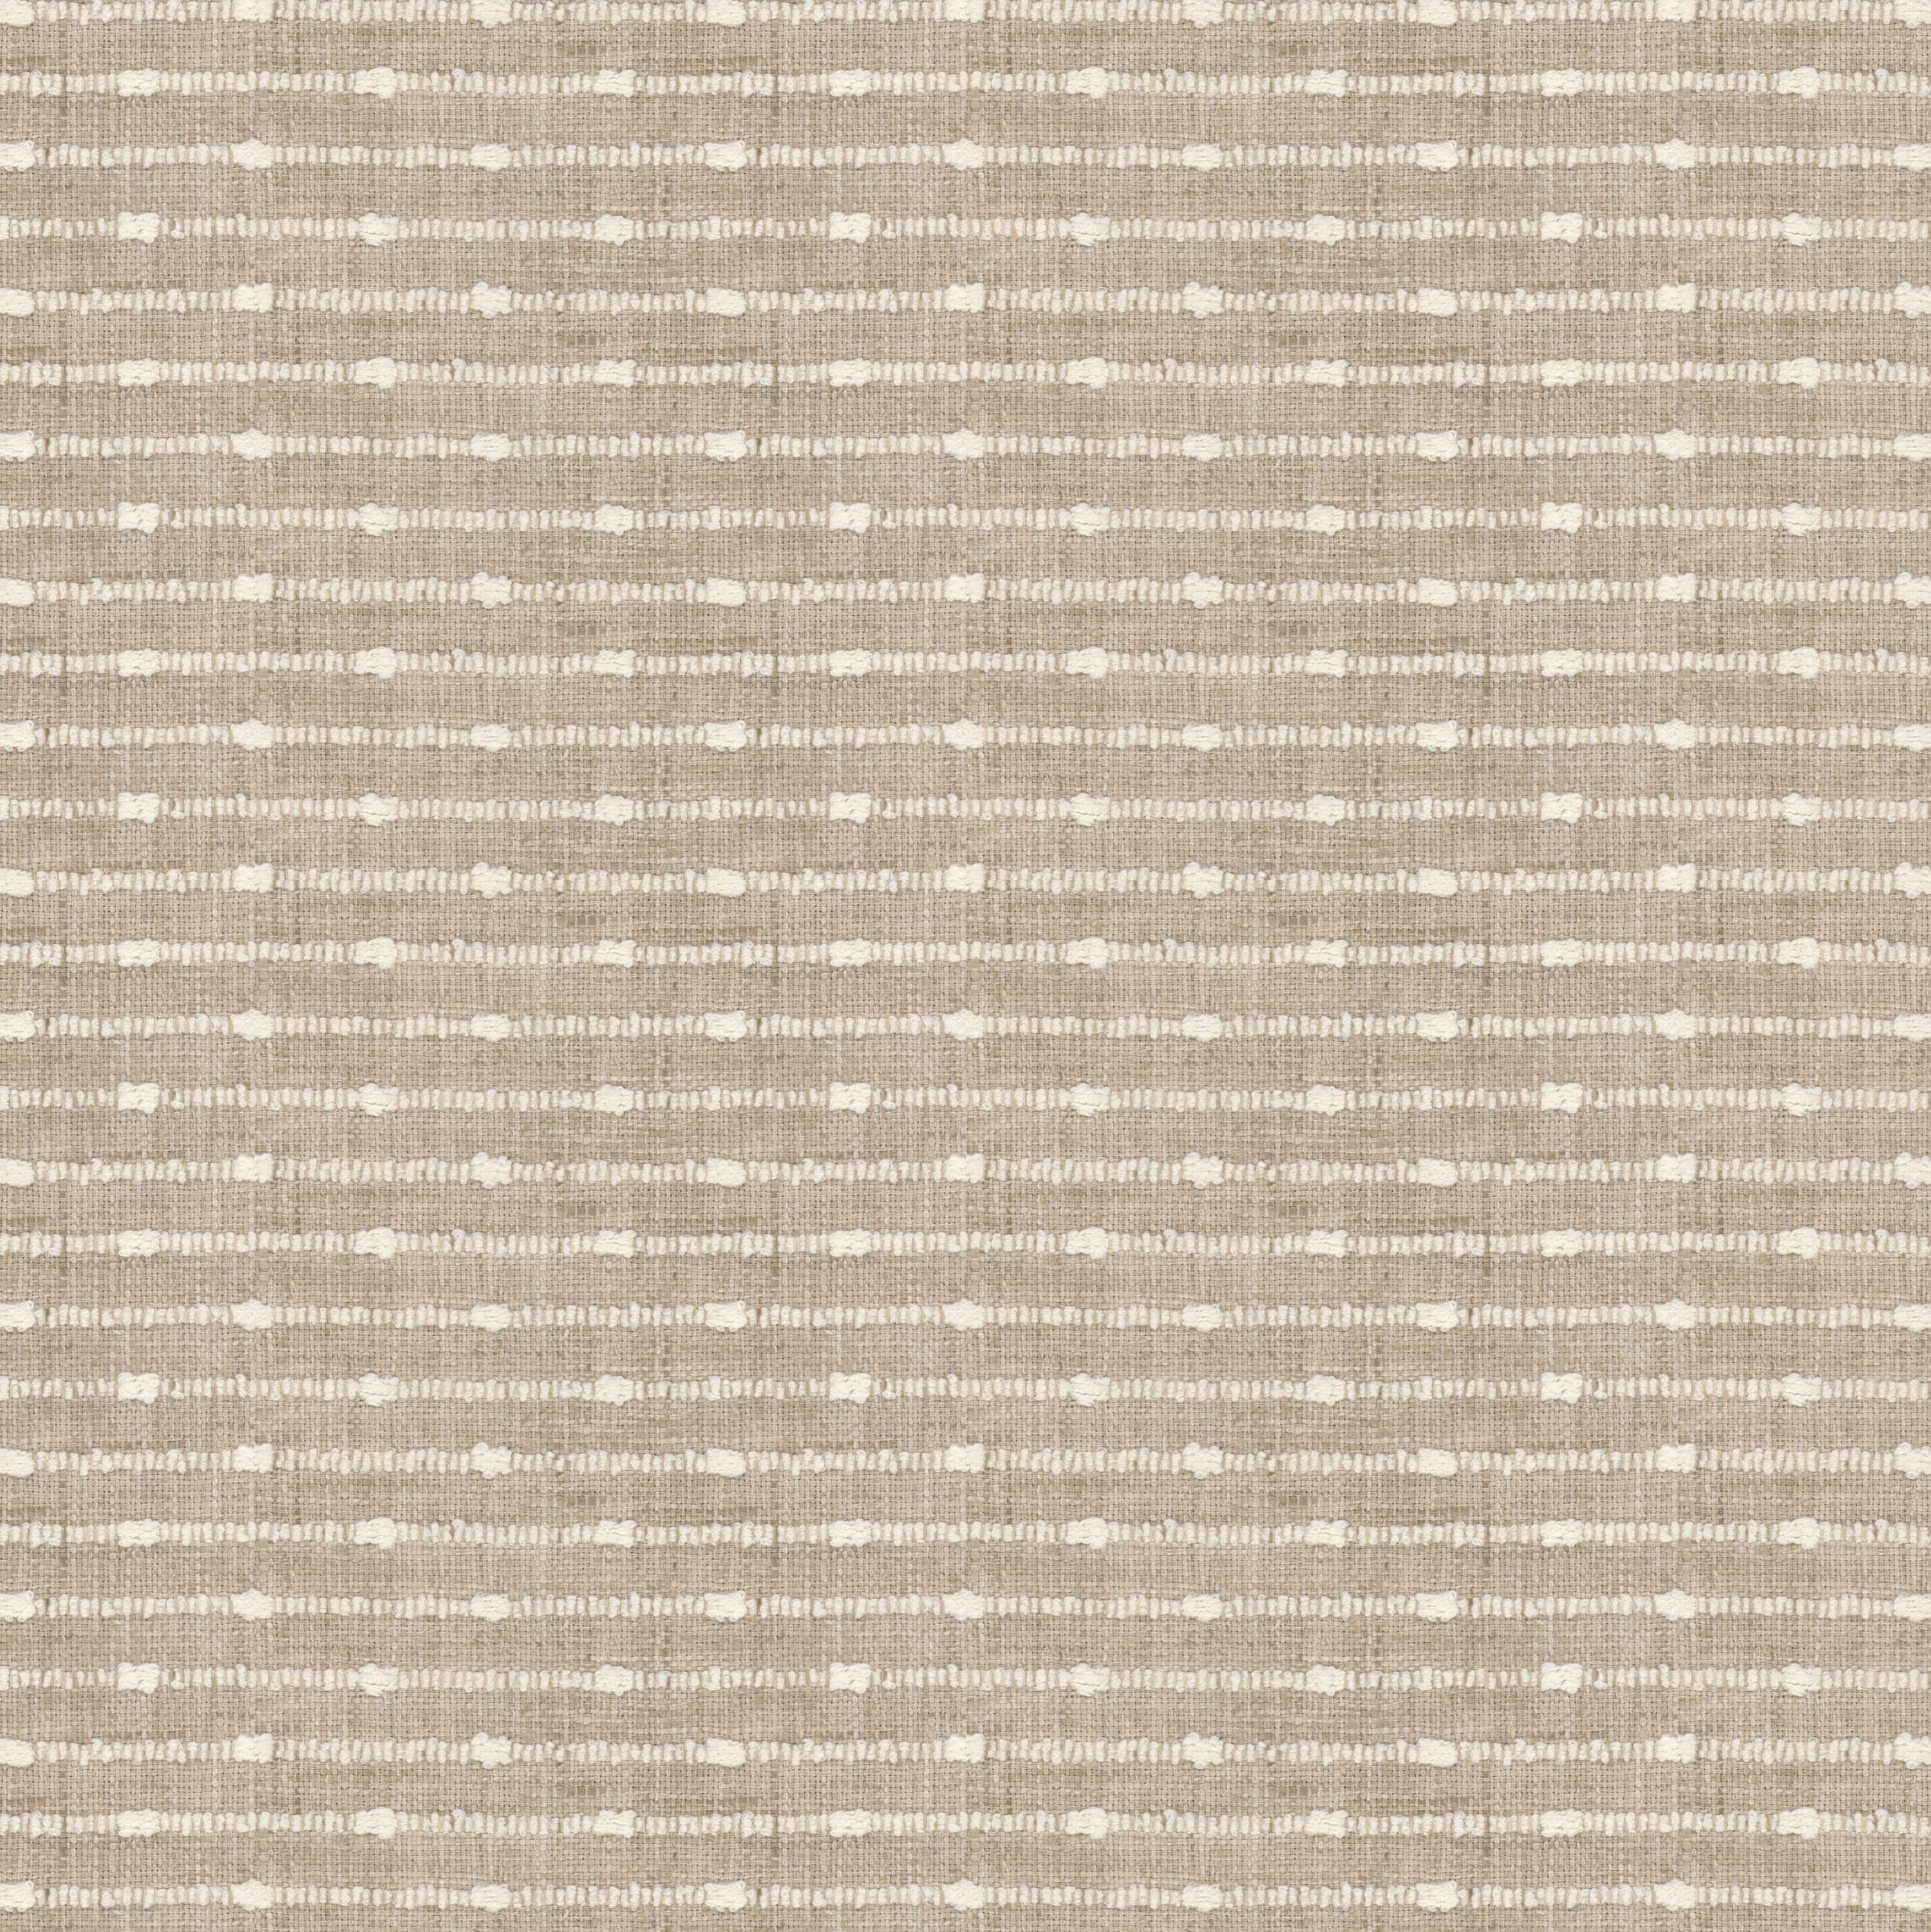 Wise 6 Wheat by Stout Fabric